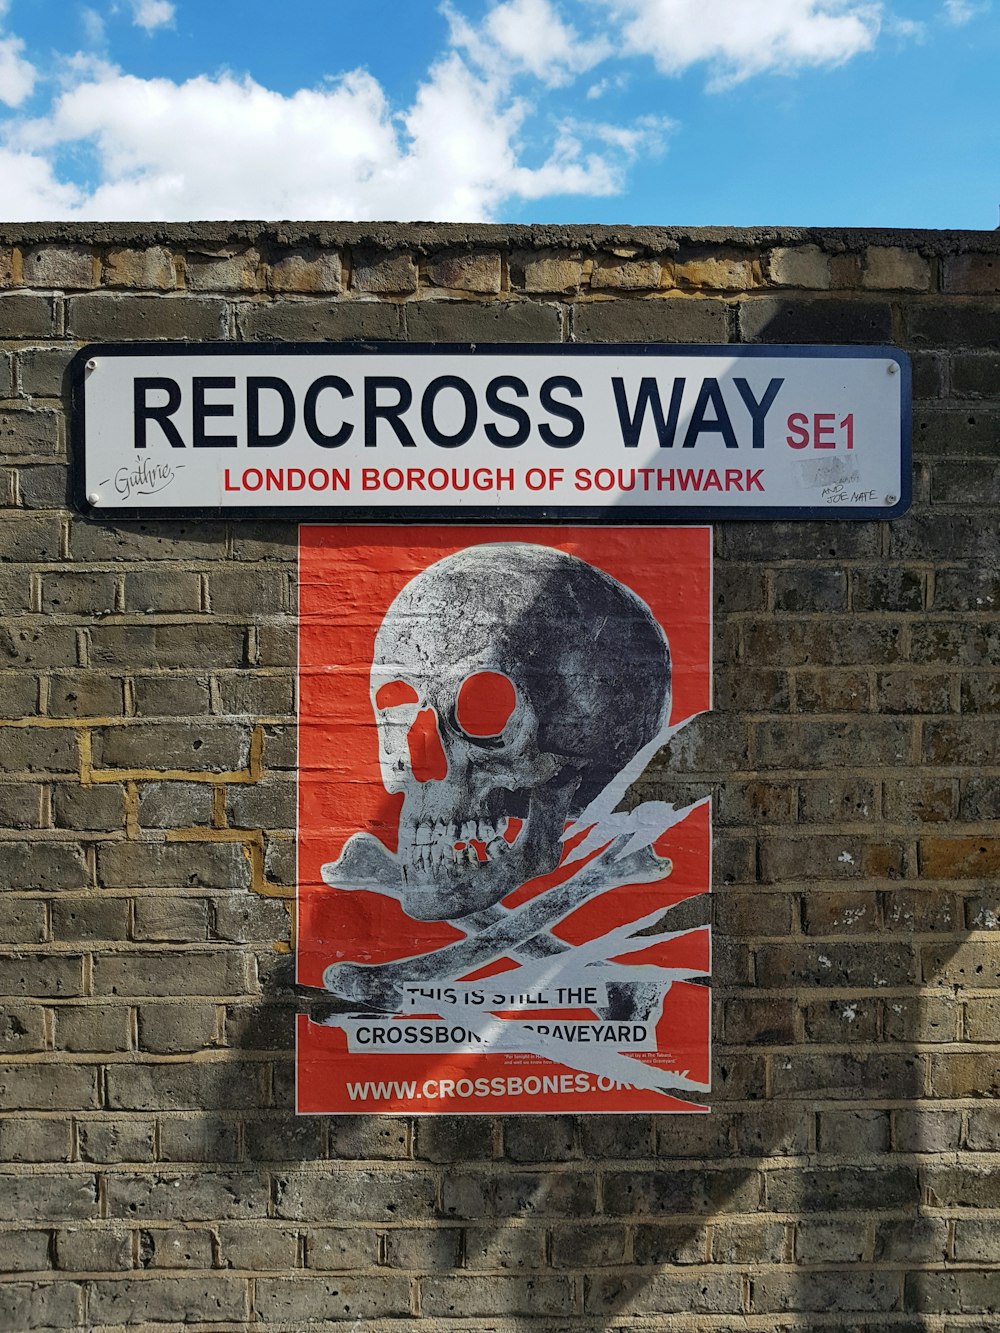 redcross way signage on concrete brick wal